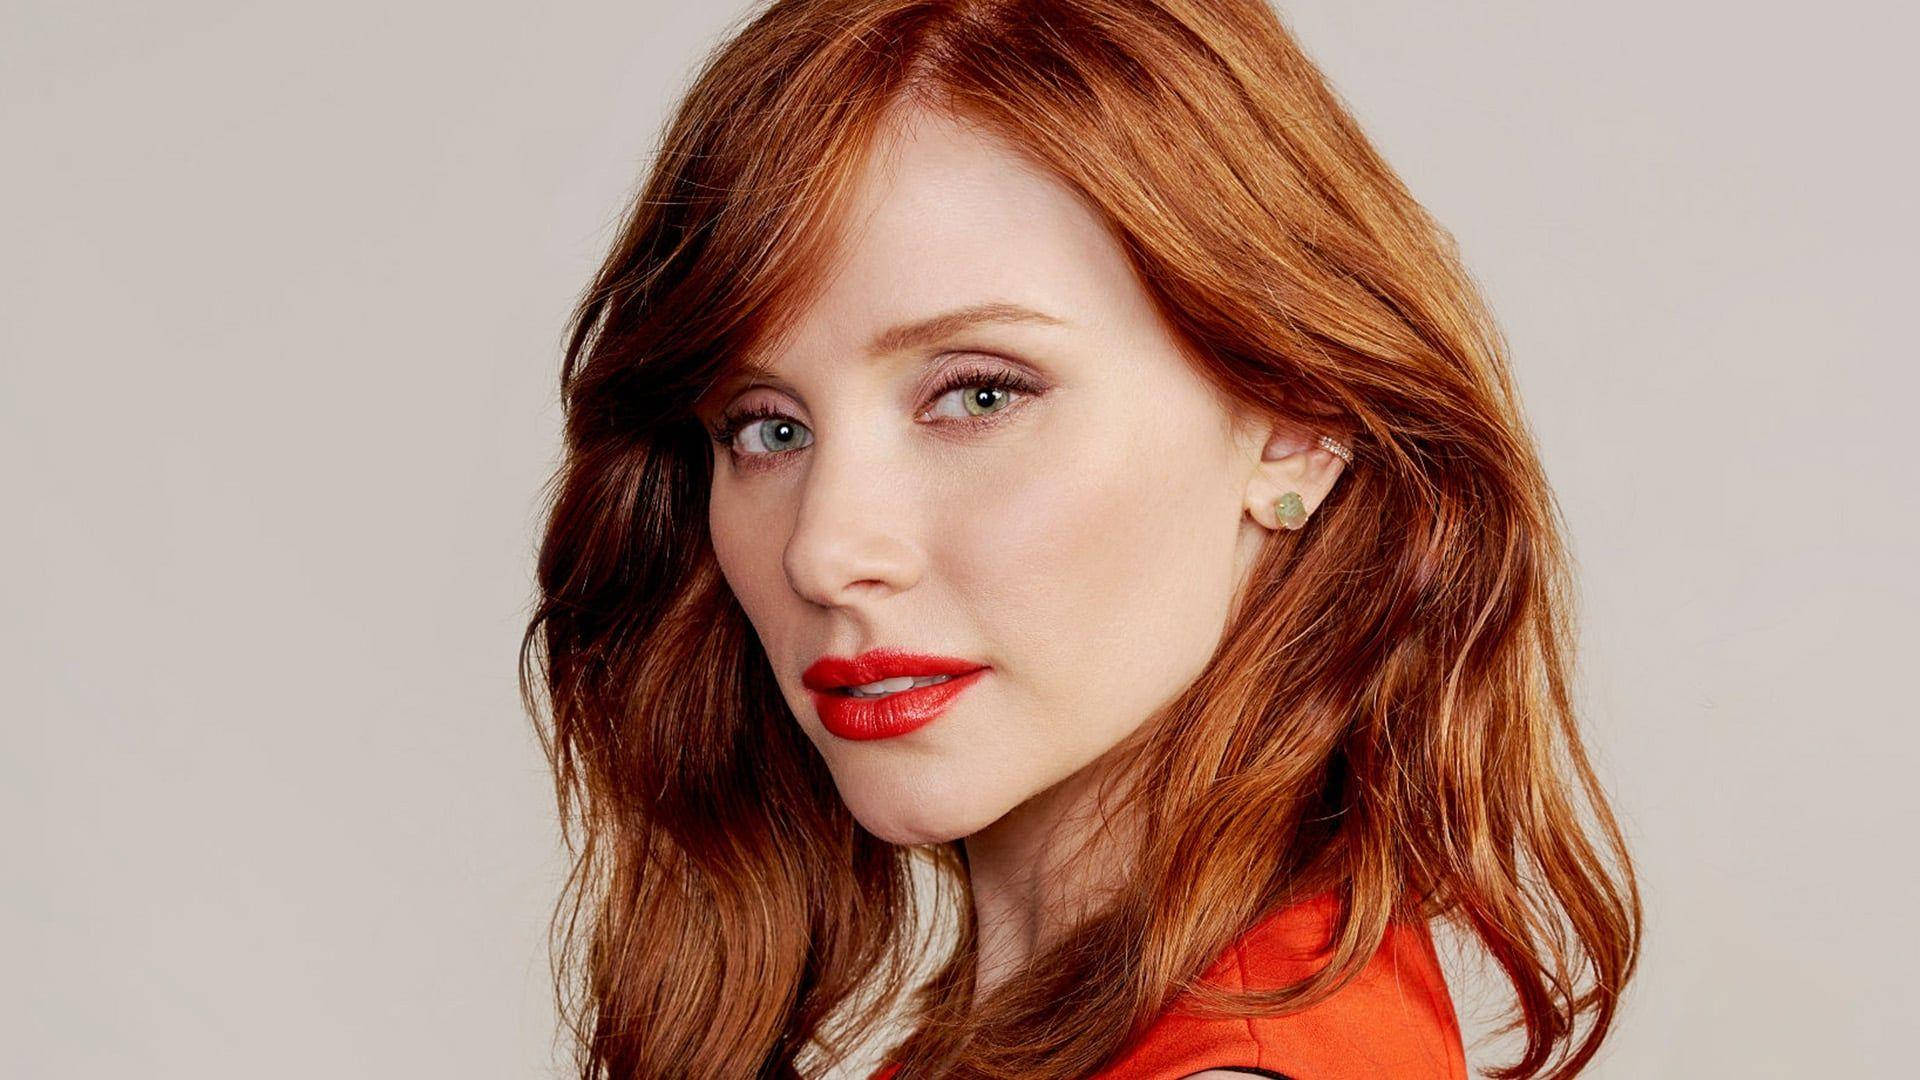 Bryce Dallas Howard With Red Lips Wallpaper